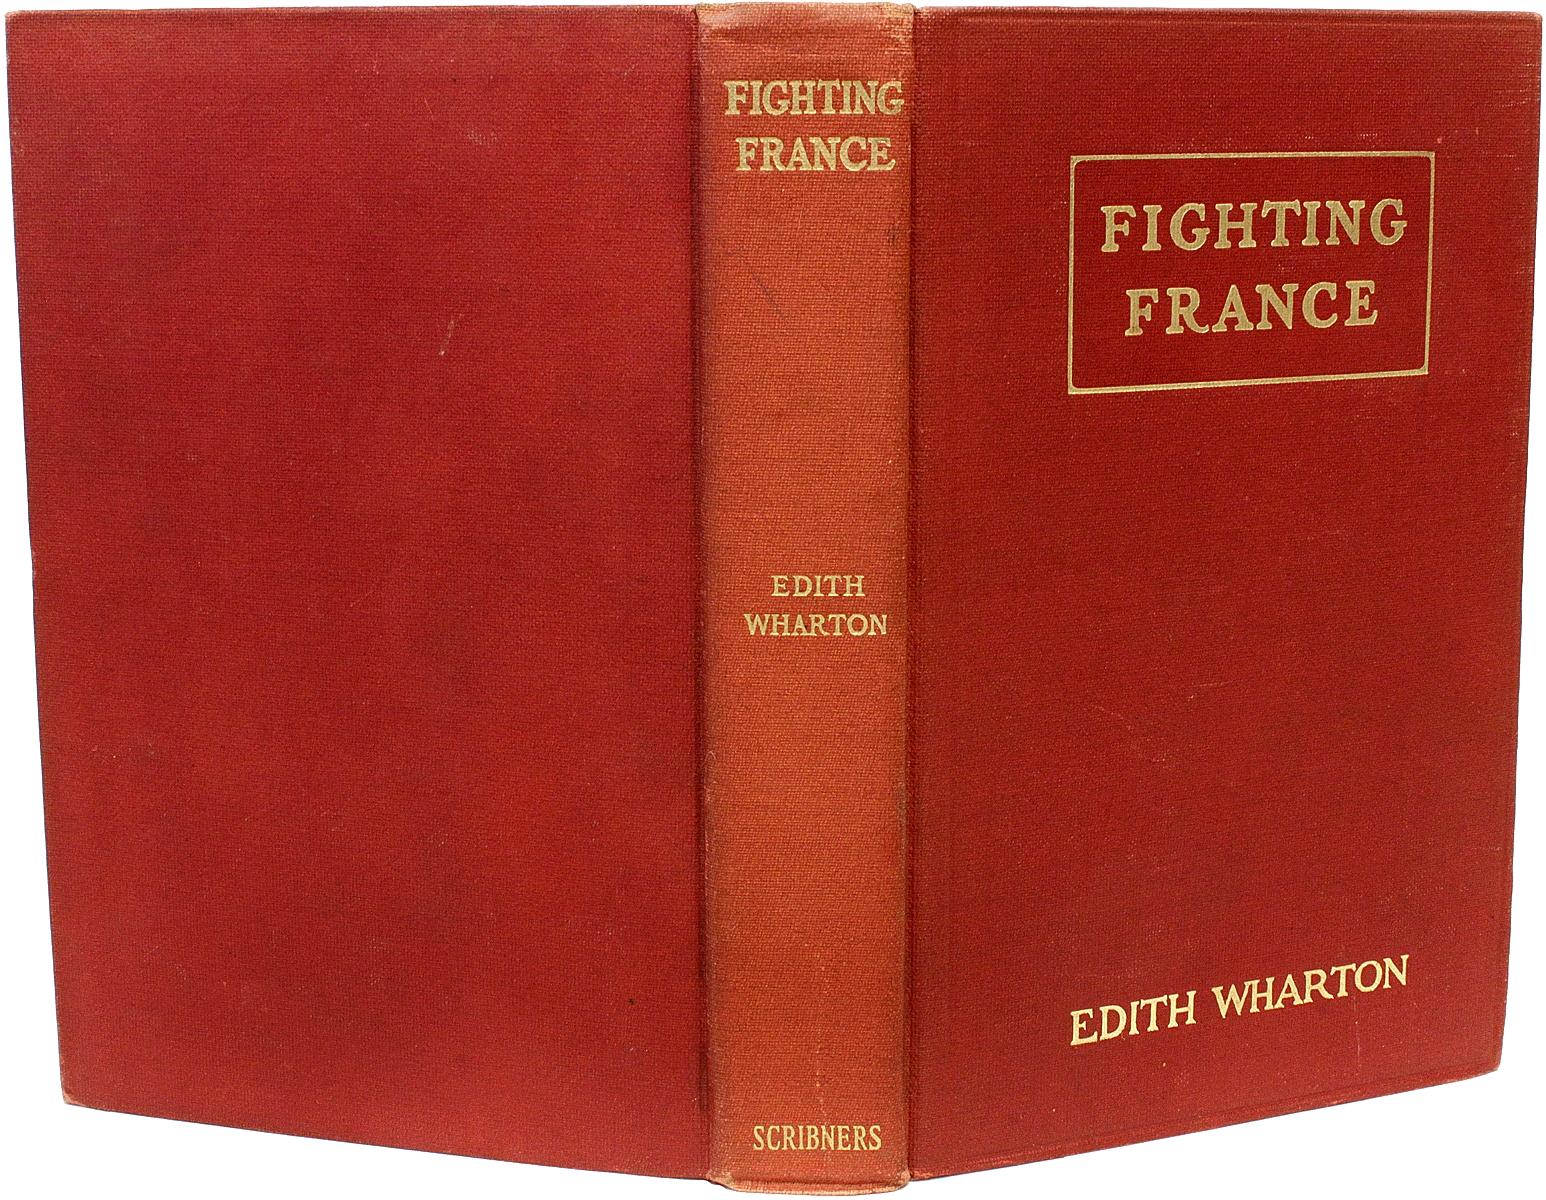 Early 20th Century Wharton, Edith, Fighting France. First Edition - 1915 - A Bright Copy